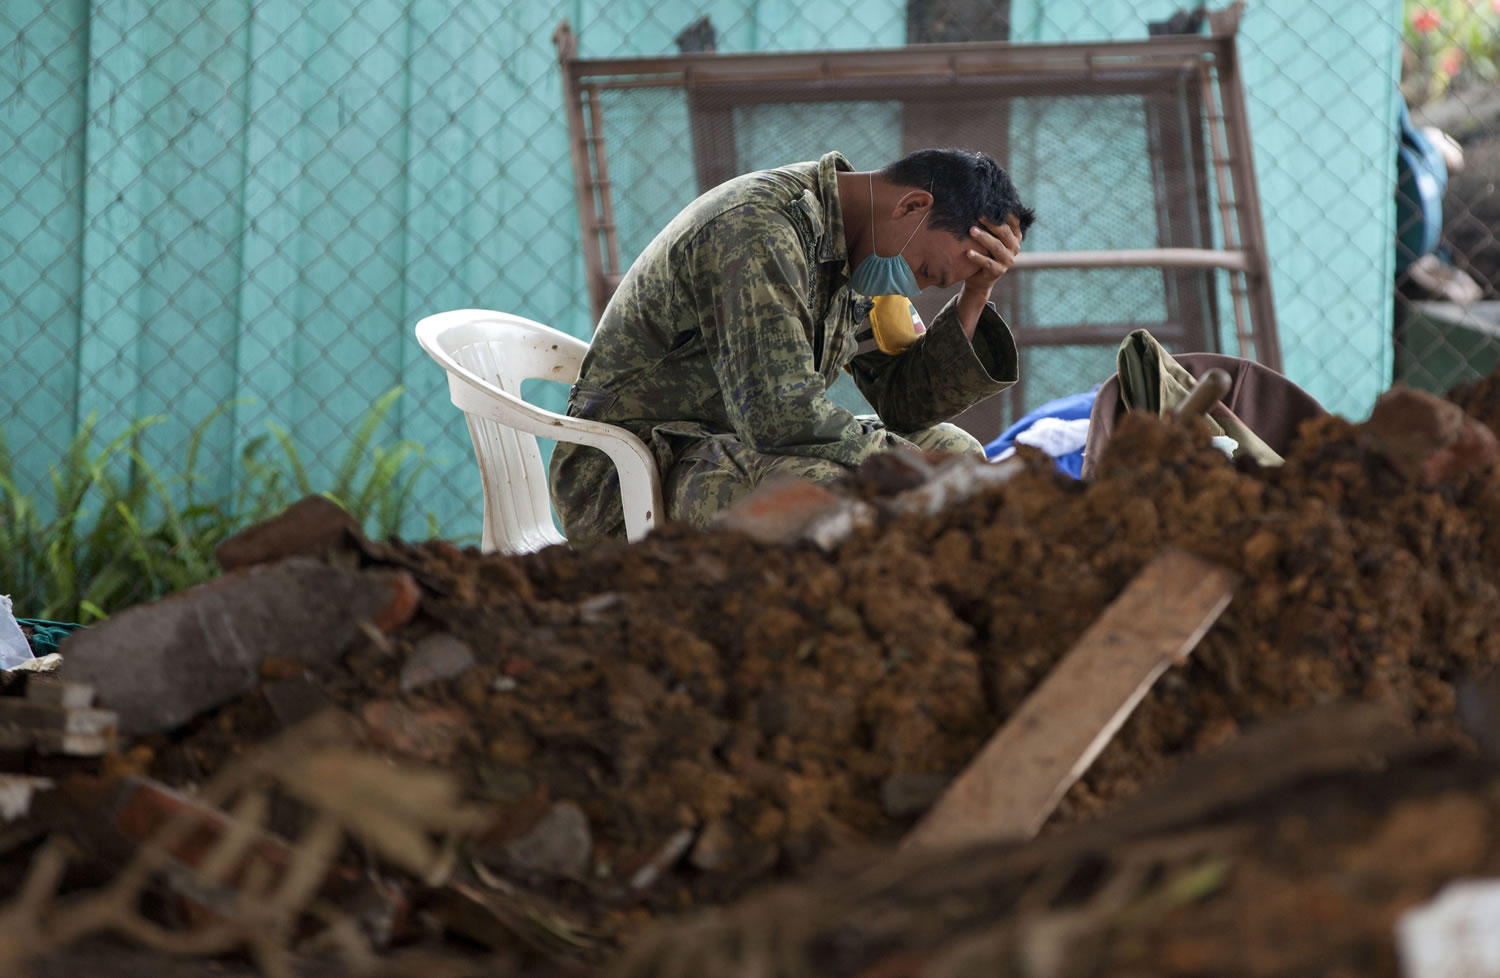 A soldier takes a break Sunday during the search for bodies in La Pintada, Mexico, where a landslide swept through the village center. La Pintada was the scene of the single greatest tragedy in the destruction wreaked by the twin storms, Manuel and Ingrid, which simultaneously pounded both of Mexico's coasts a week ago, spawning huge floods and landslides across a third of the country.